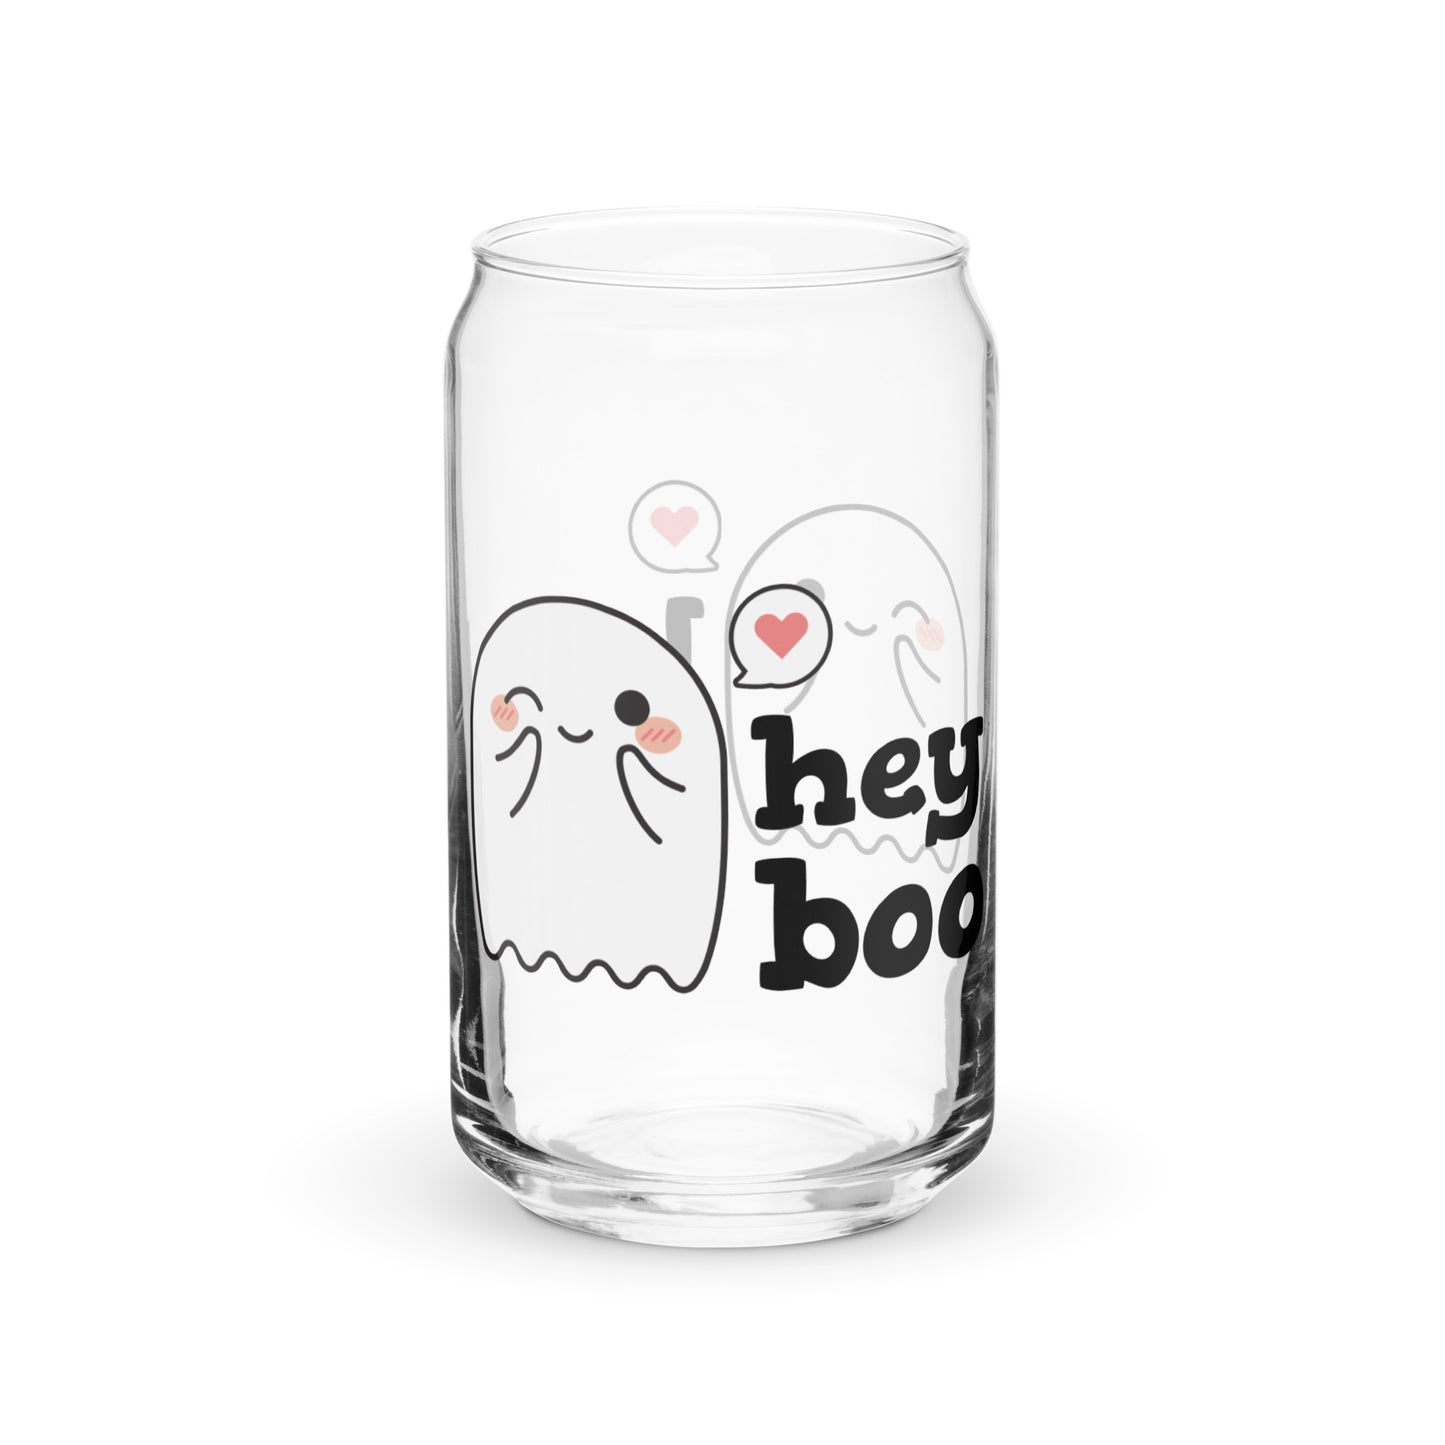 A can-shaped glass featuring an illustration of a blushing, winking ghost. Text alongside the ghost reads "hey boo".